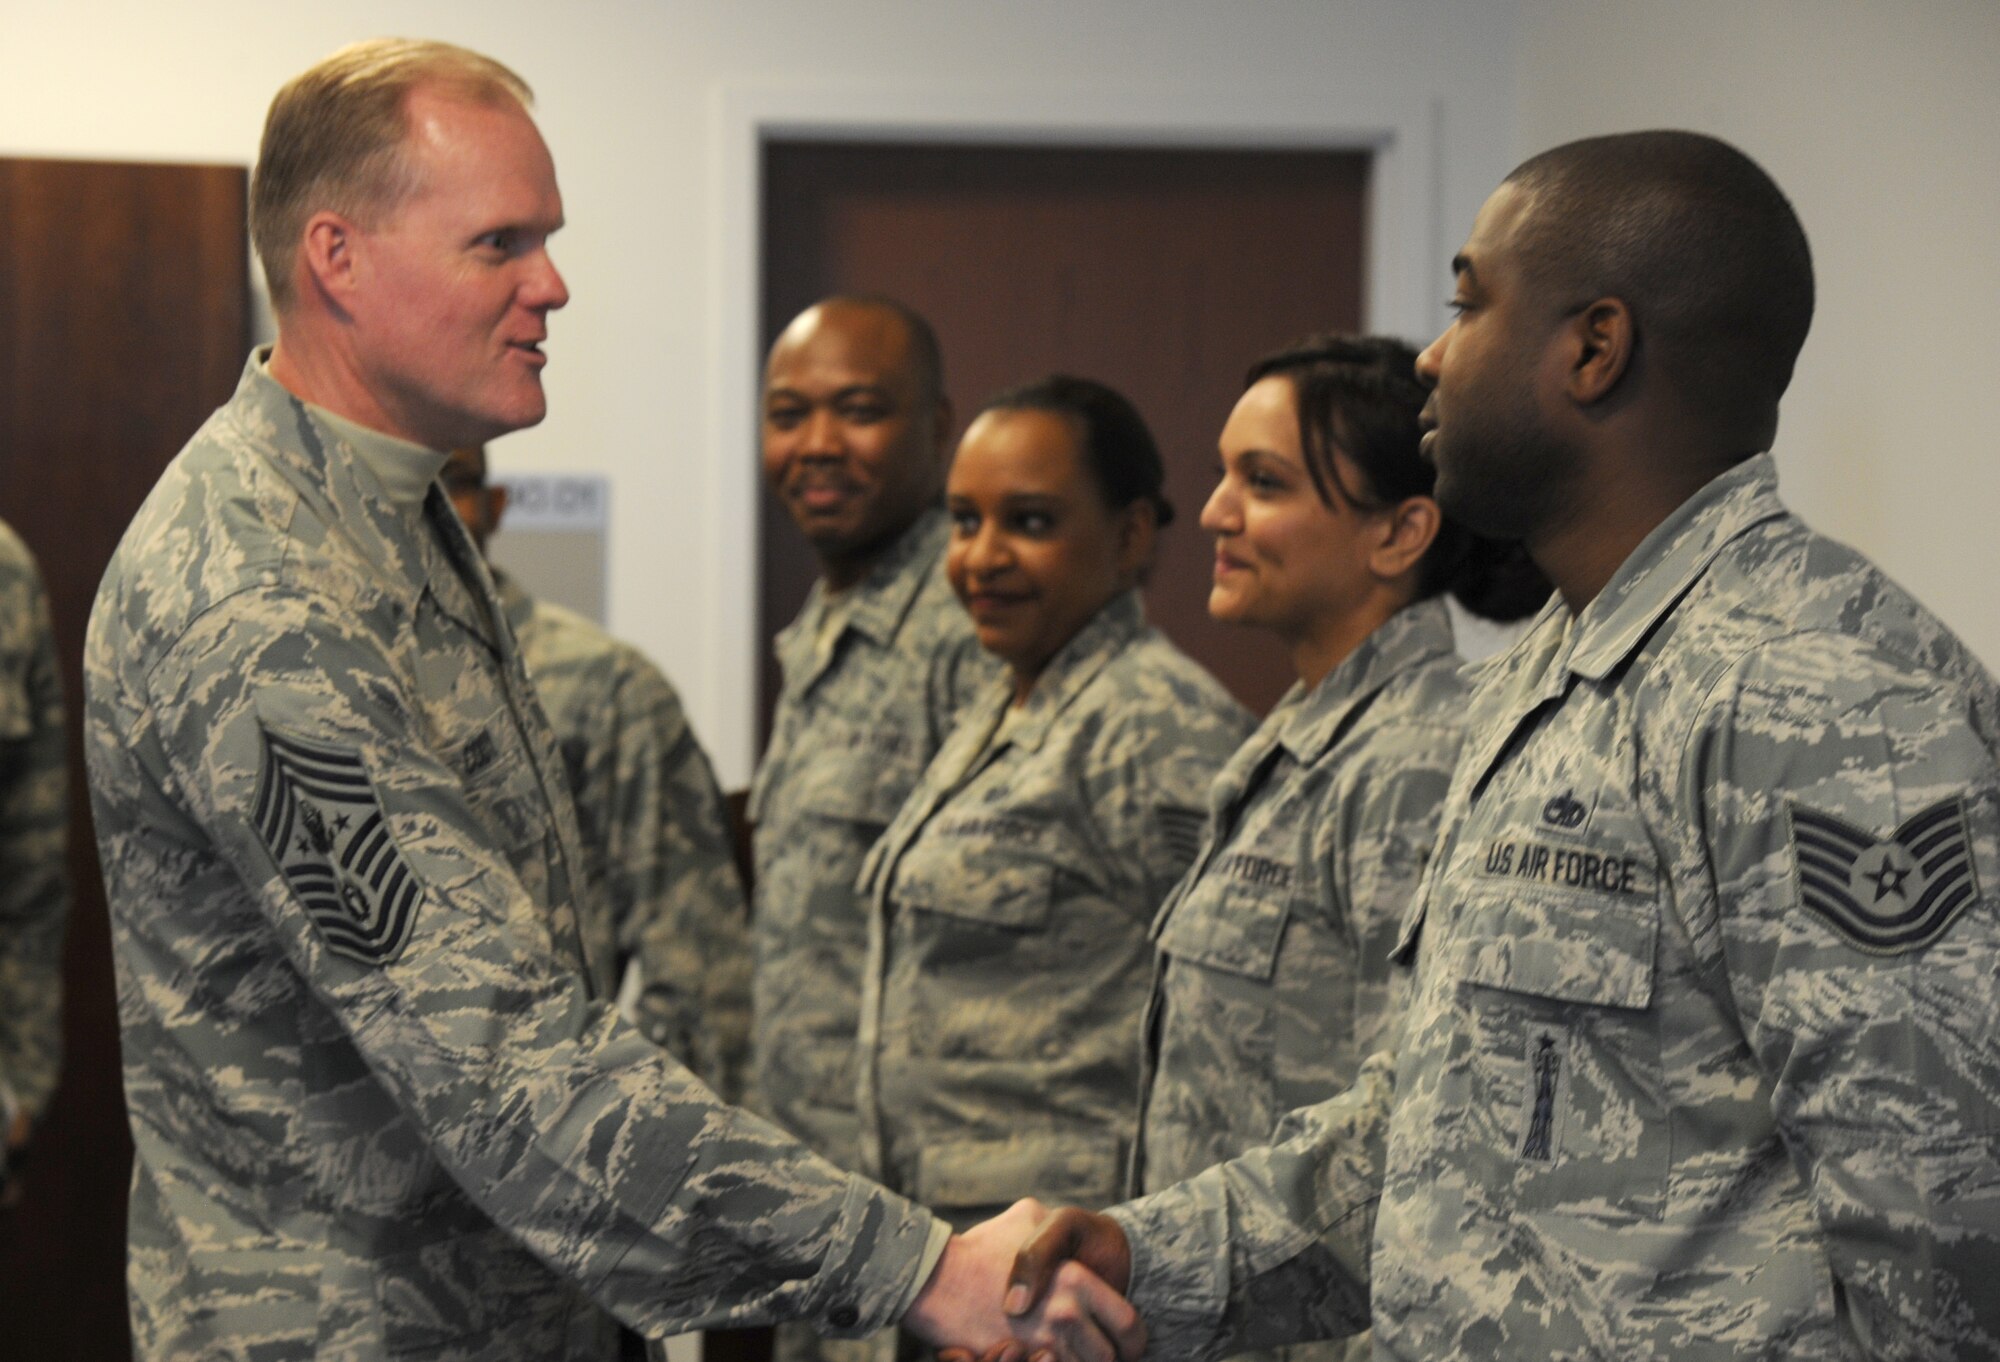 Chief Master Sgt. of the Air Force James A. Cody introduces himself to Tech. Sgt. Thomas White during his visit with Airmen assigned to the Air Force District of Washington March 23, 2015, at Joint Base Andrews, Md. White is the unit training manager for AFDW. (U.S. Air Force photo/Master Sgt. Tammie Moore)